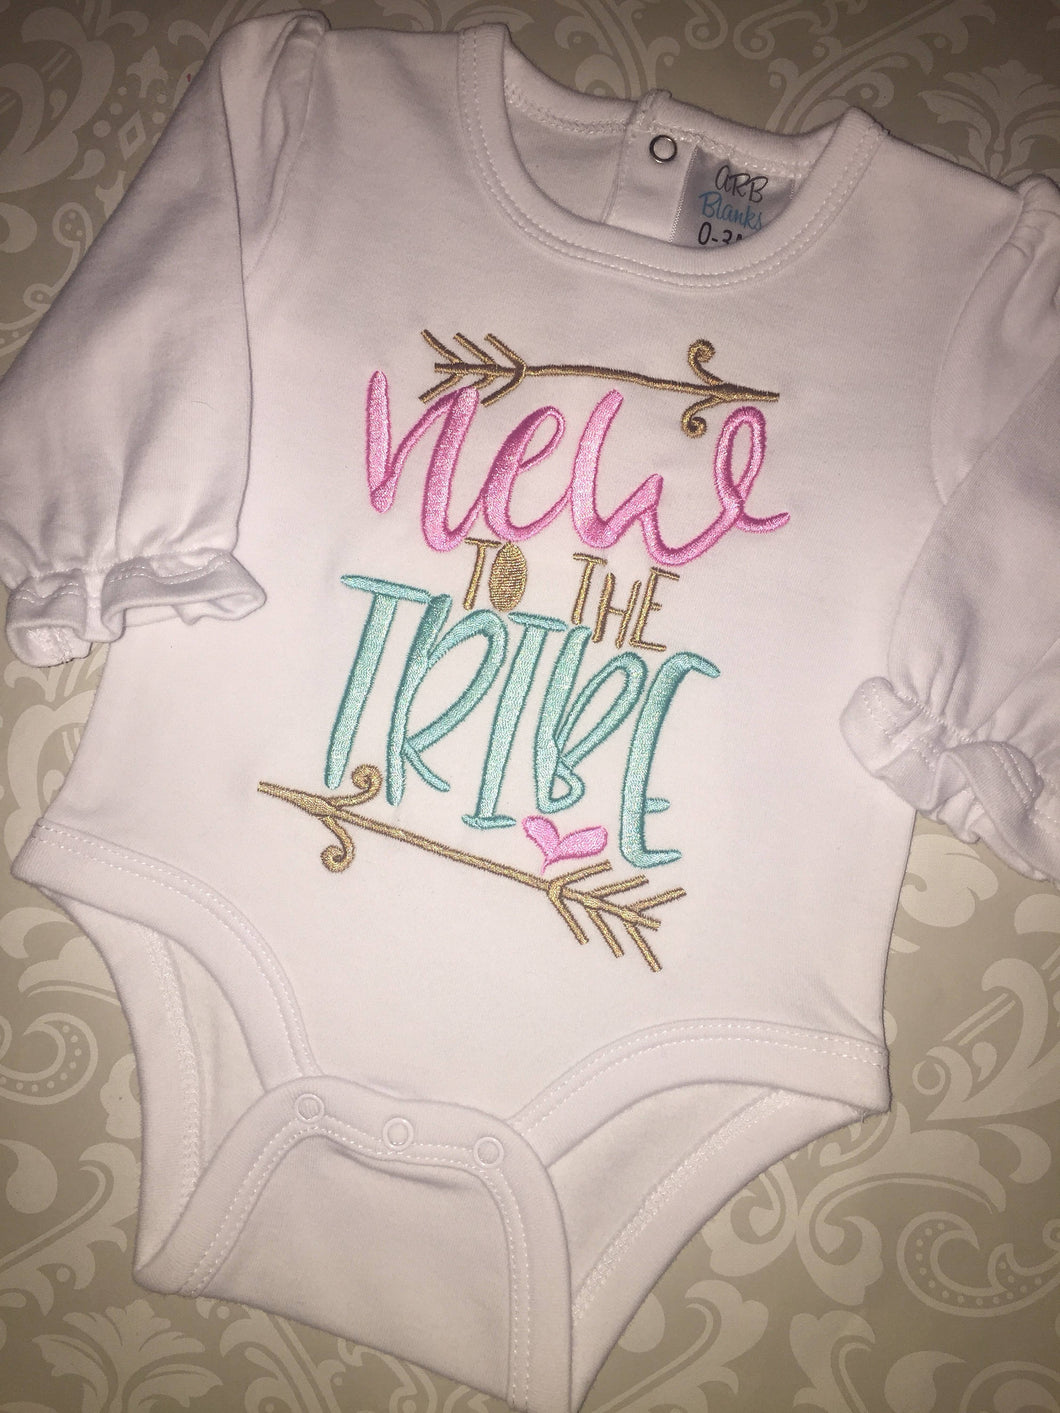 New to the tribe baby bodysuit